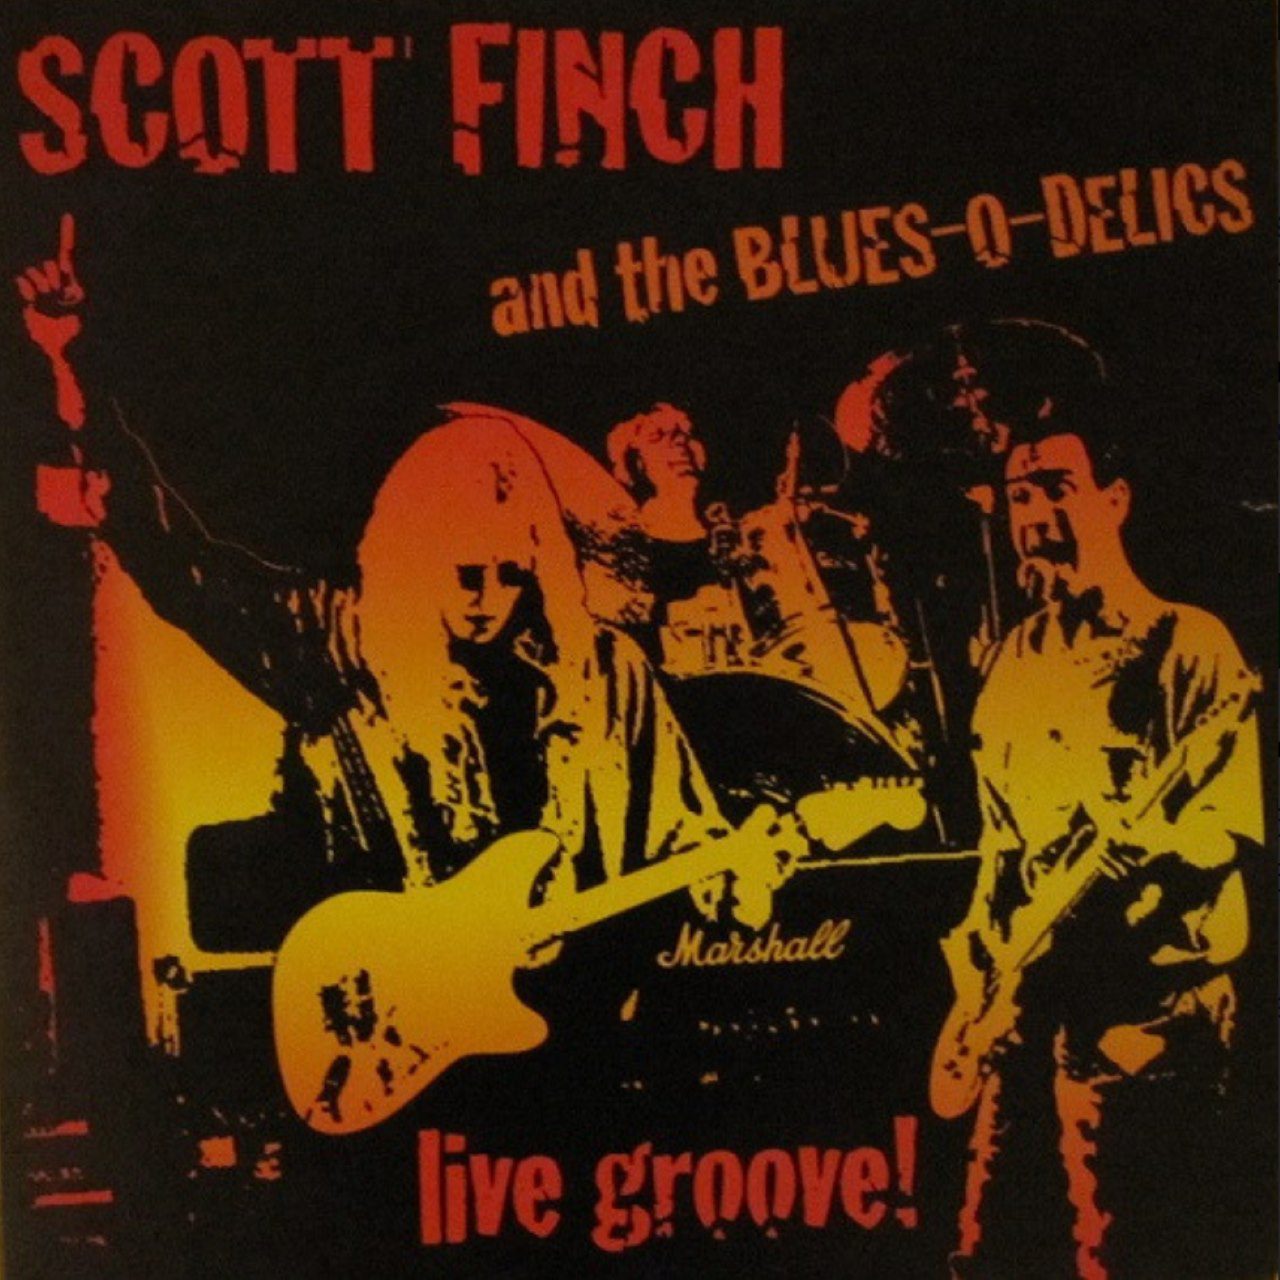 Scott Finch And The Blues-O-Delics – Live Groove cover album